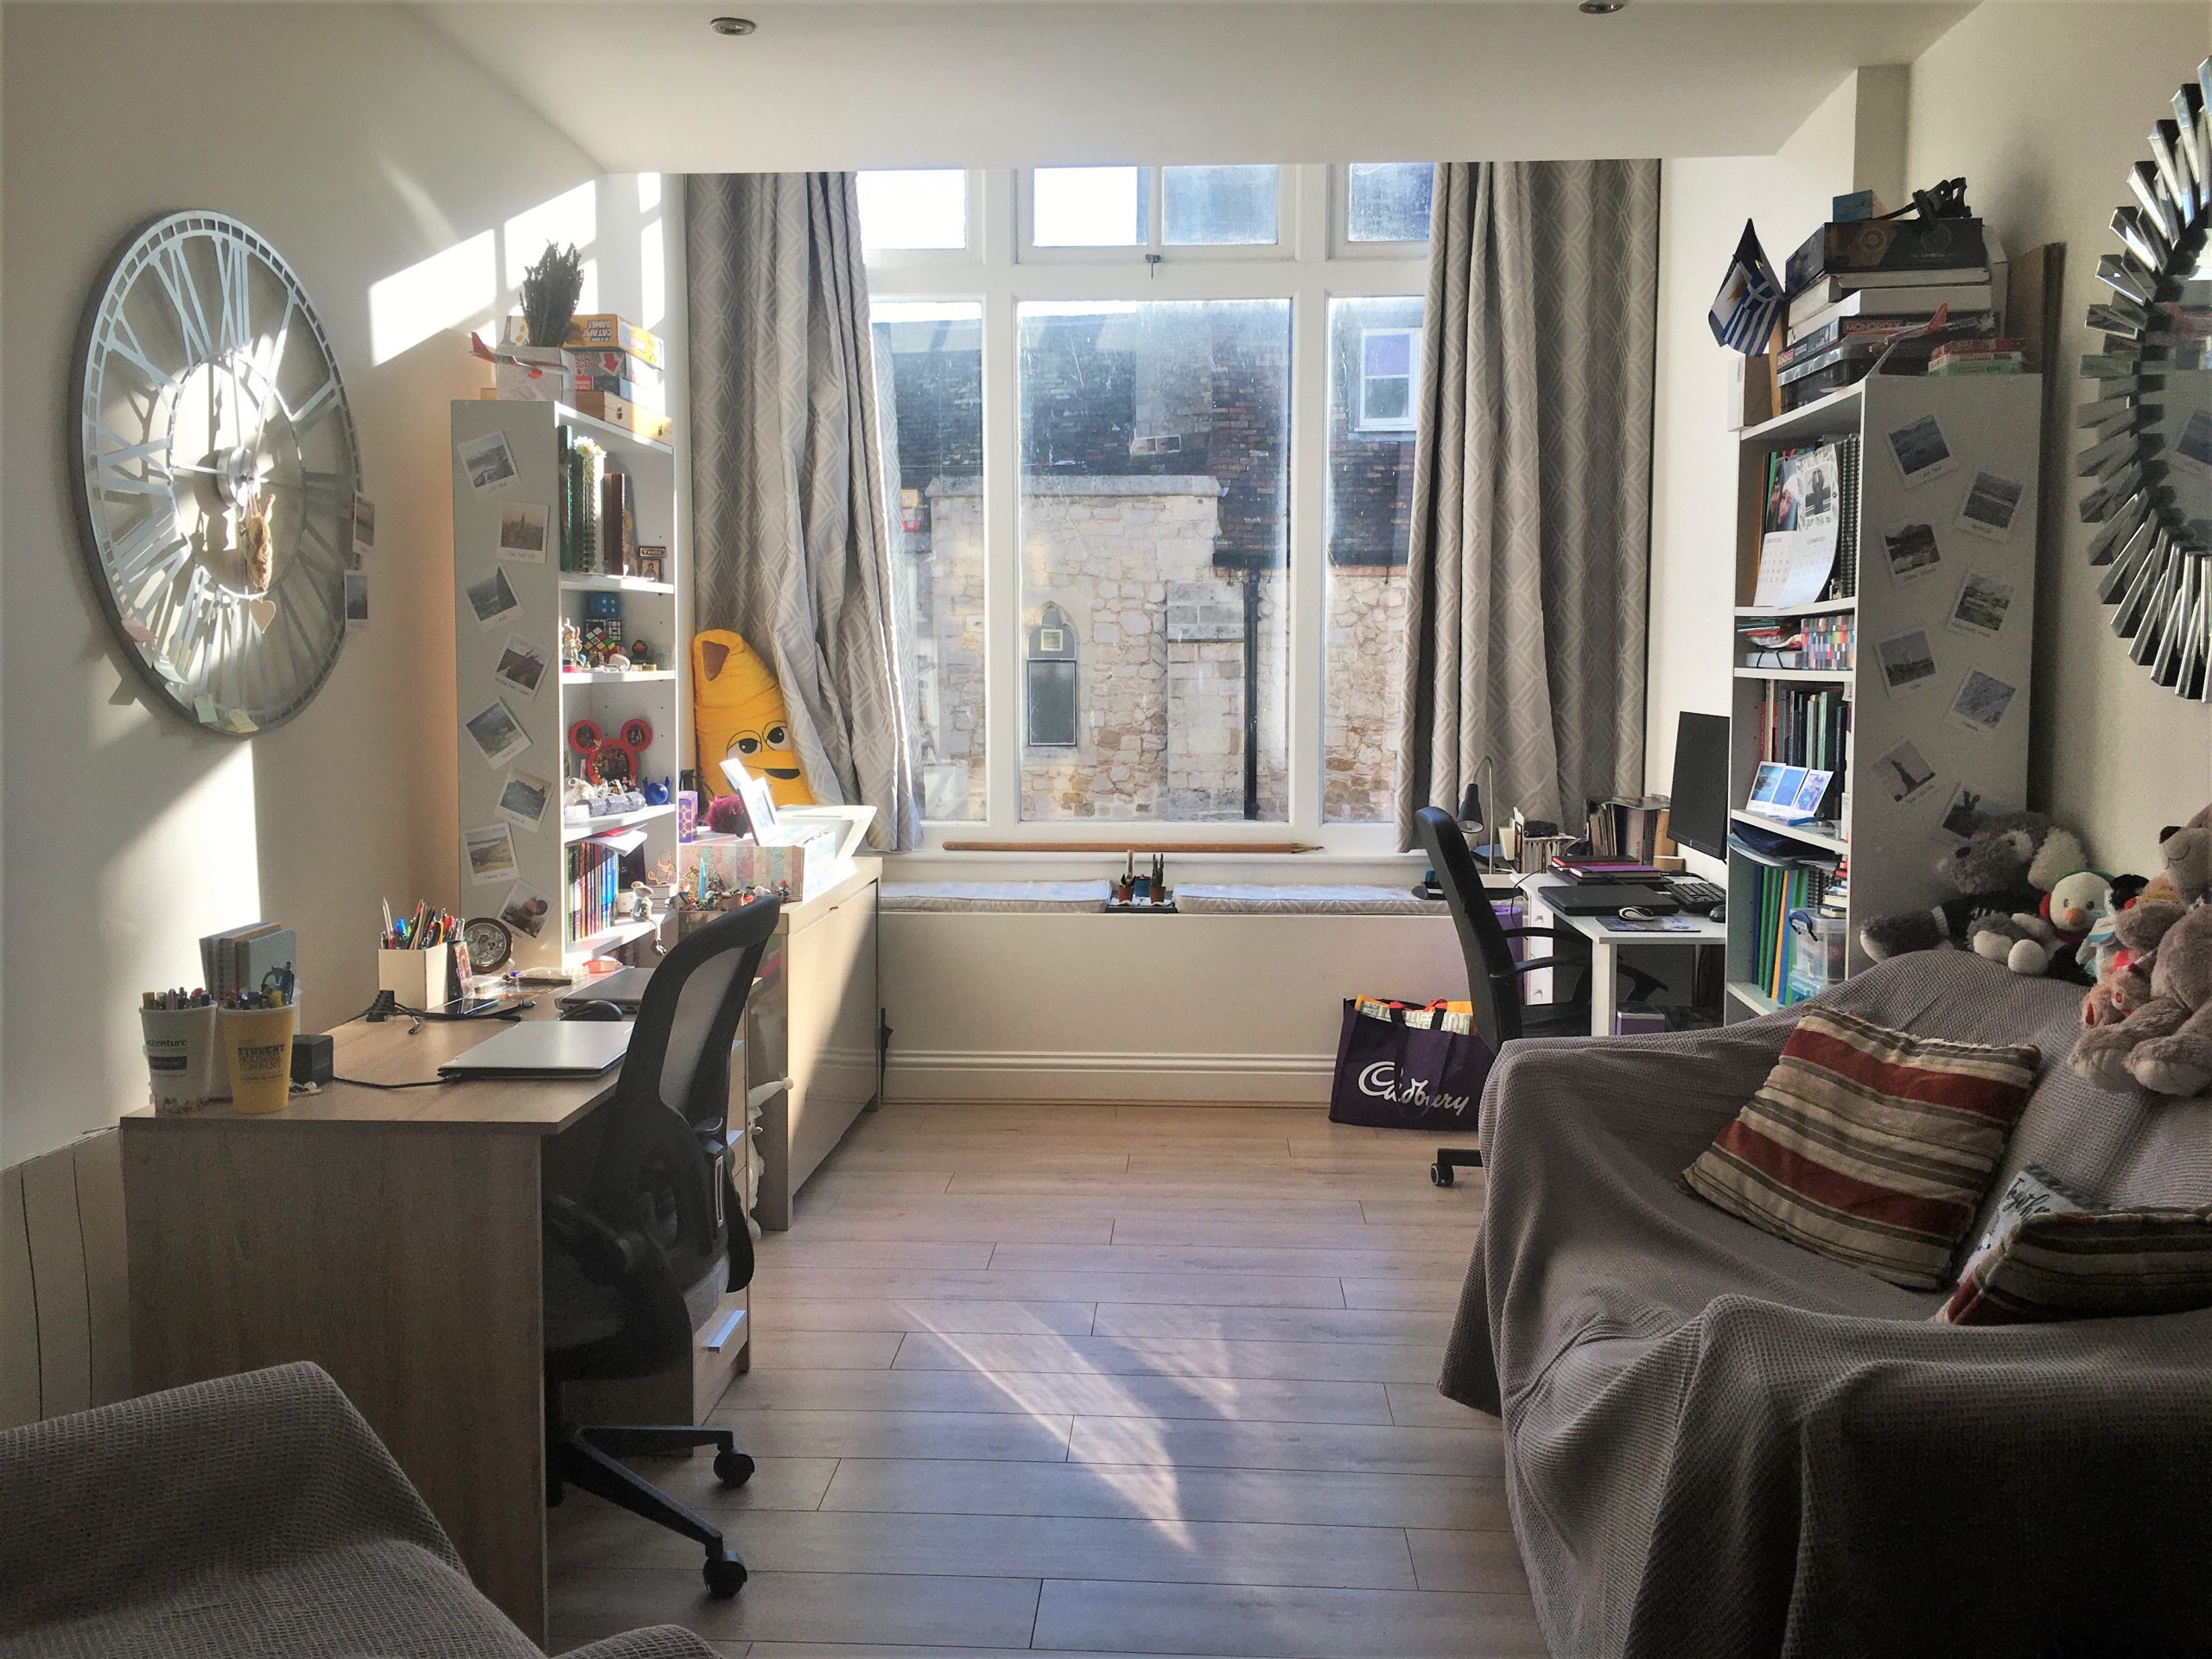 A space with two desks, two bookcases, a sofa and a window for how I spend my time at home